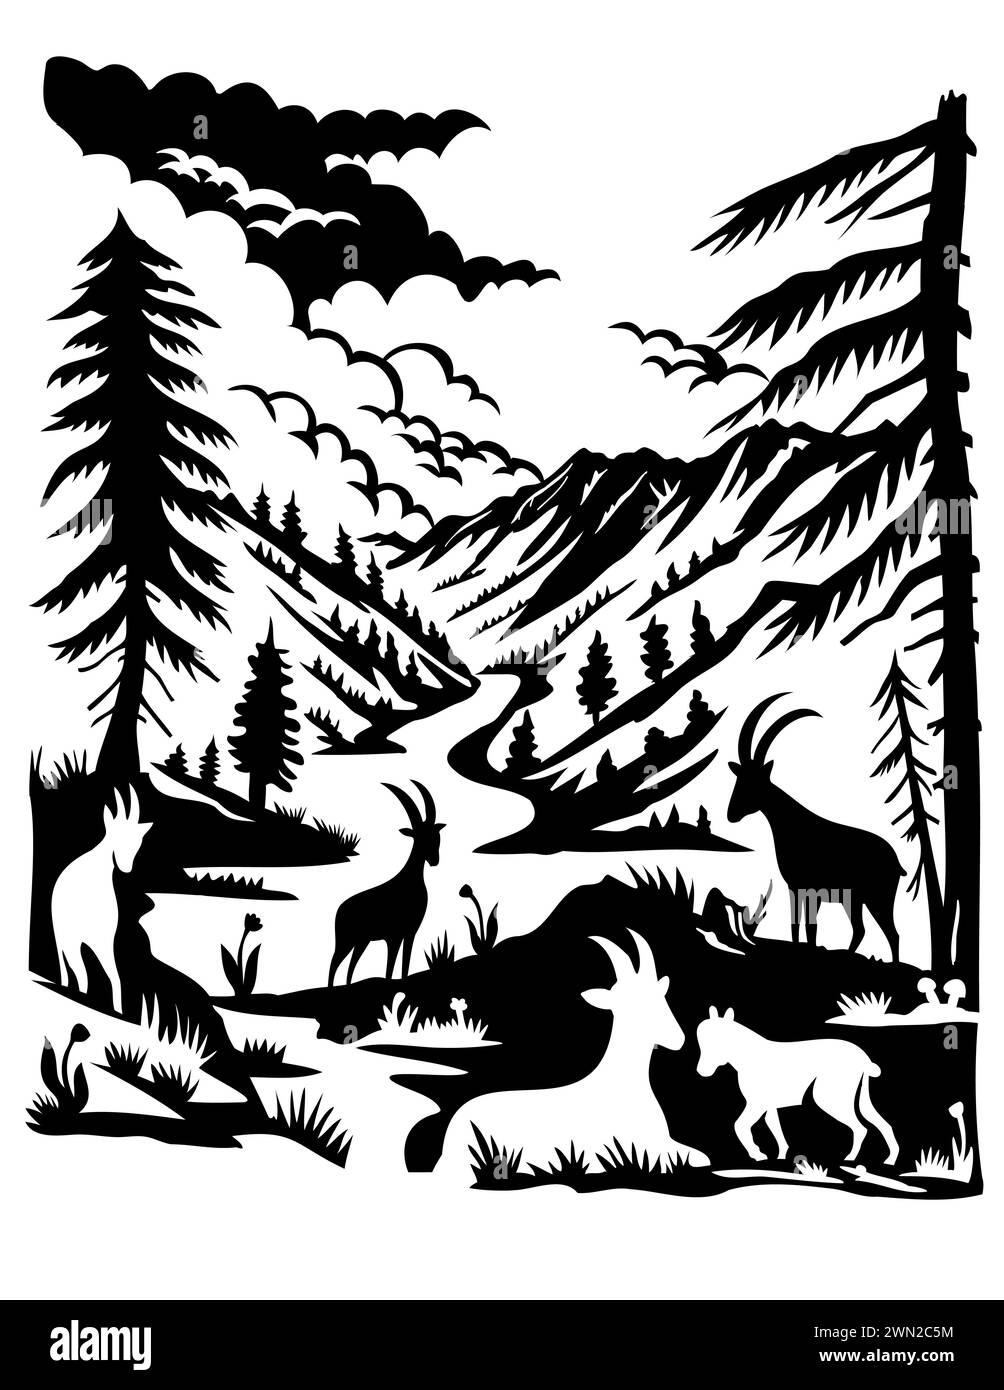 Swiss scherenschnitt or scissors cut illustration of silhouette of ibex with Val Trupchun located in Swiss National Park in Western Rhaetian Alps, Swi Stock Photo